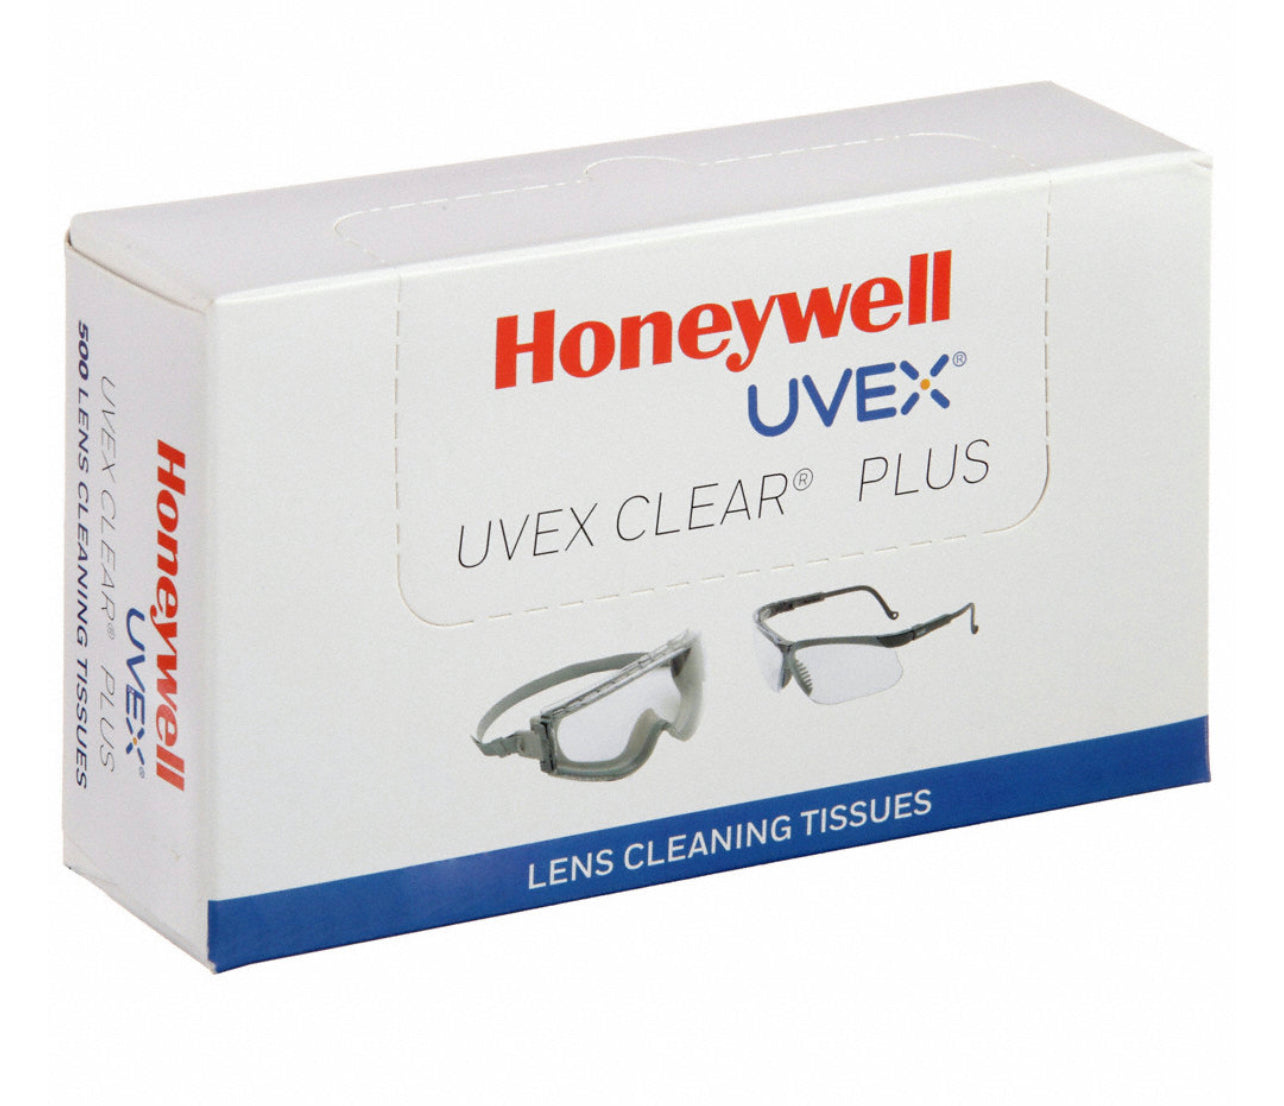 UVEX Tissues for Metal Lens Clean Station